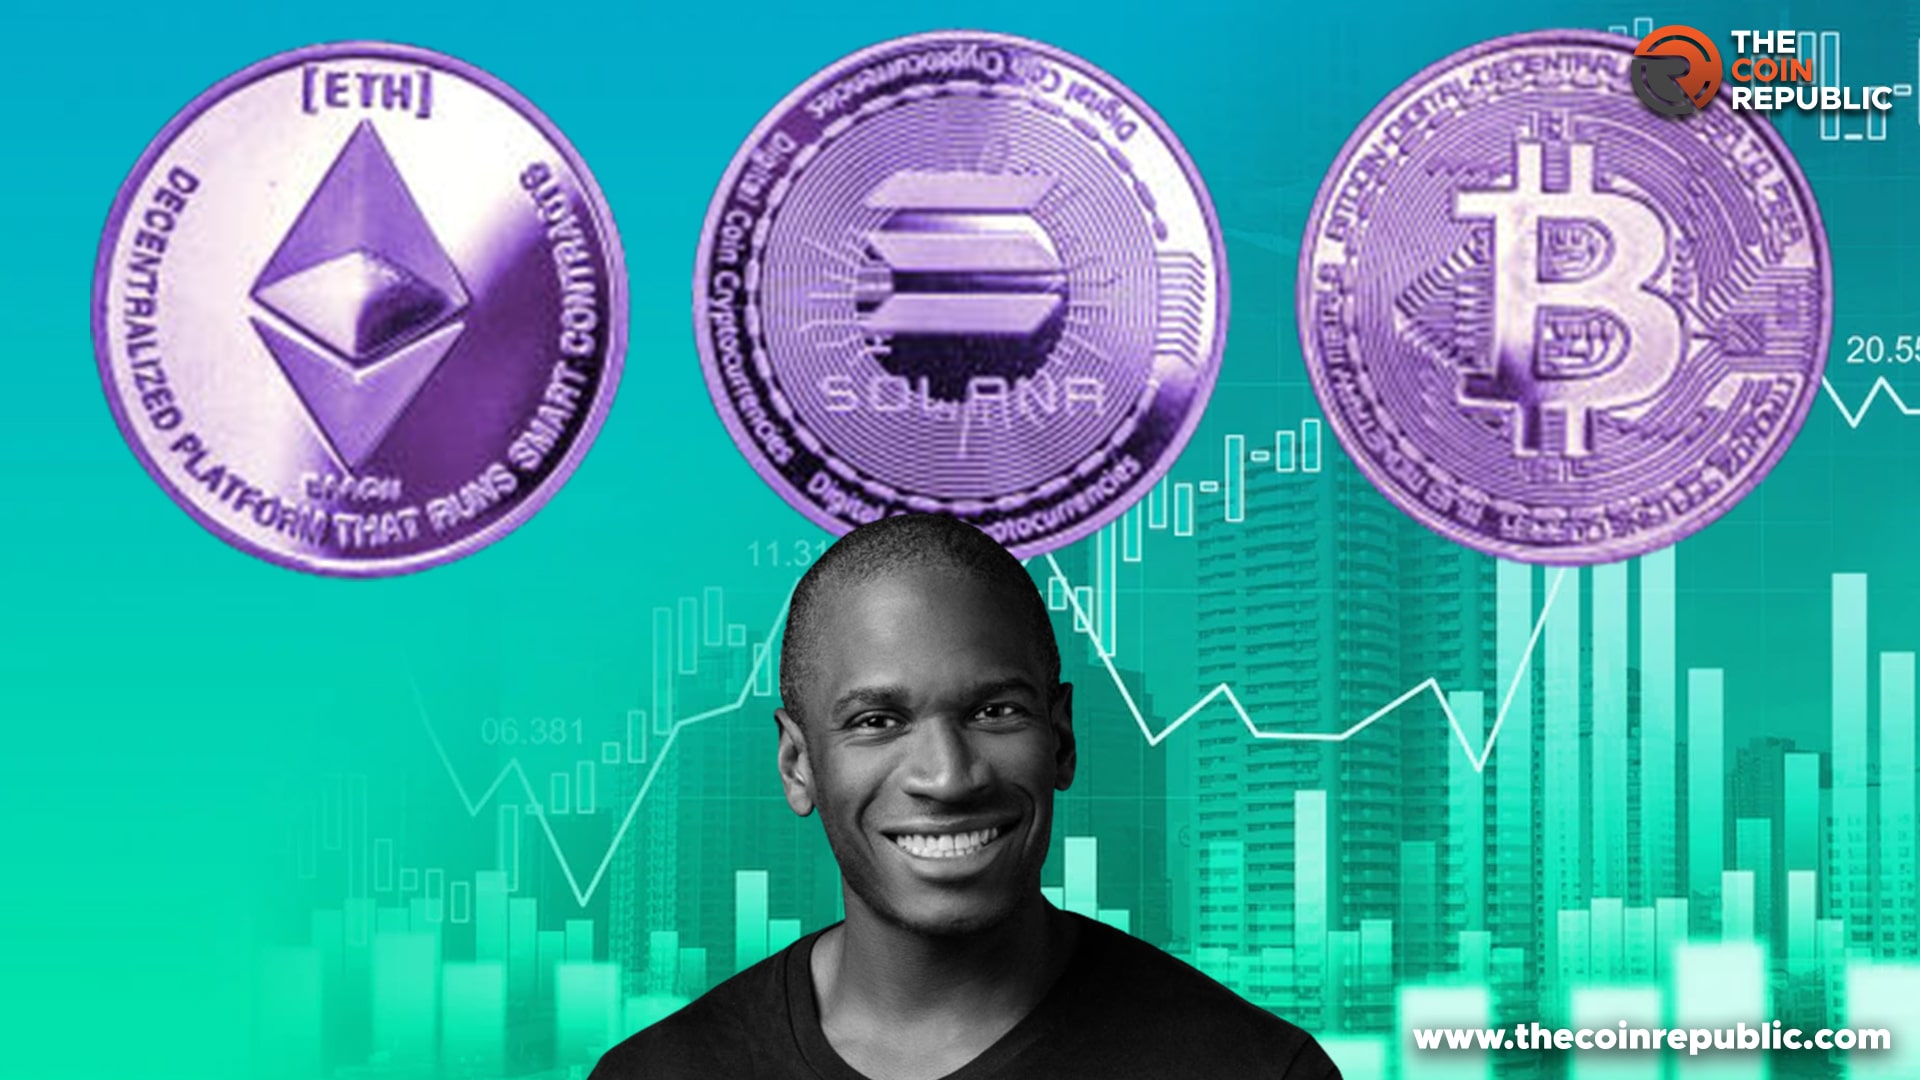 BitMex’s Founder Stated That The Downfall Of FTX Will Impact Bitcoin, Ethereum, And Solana